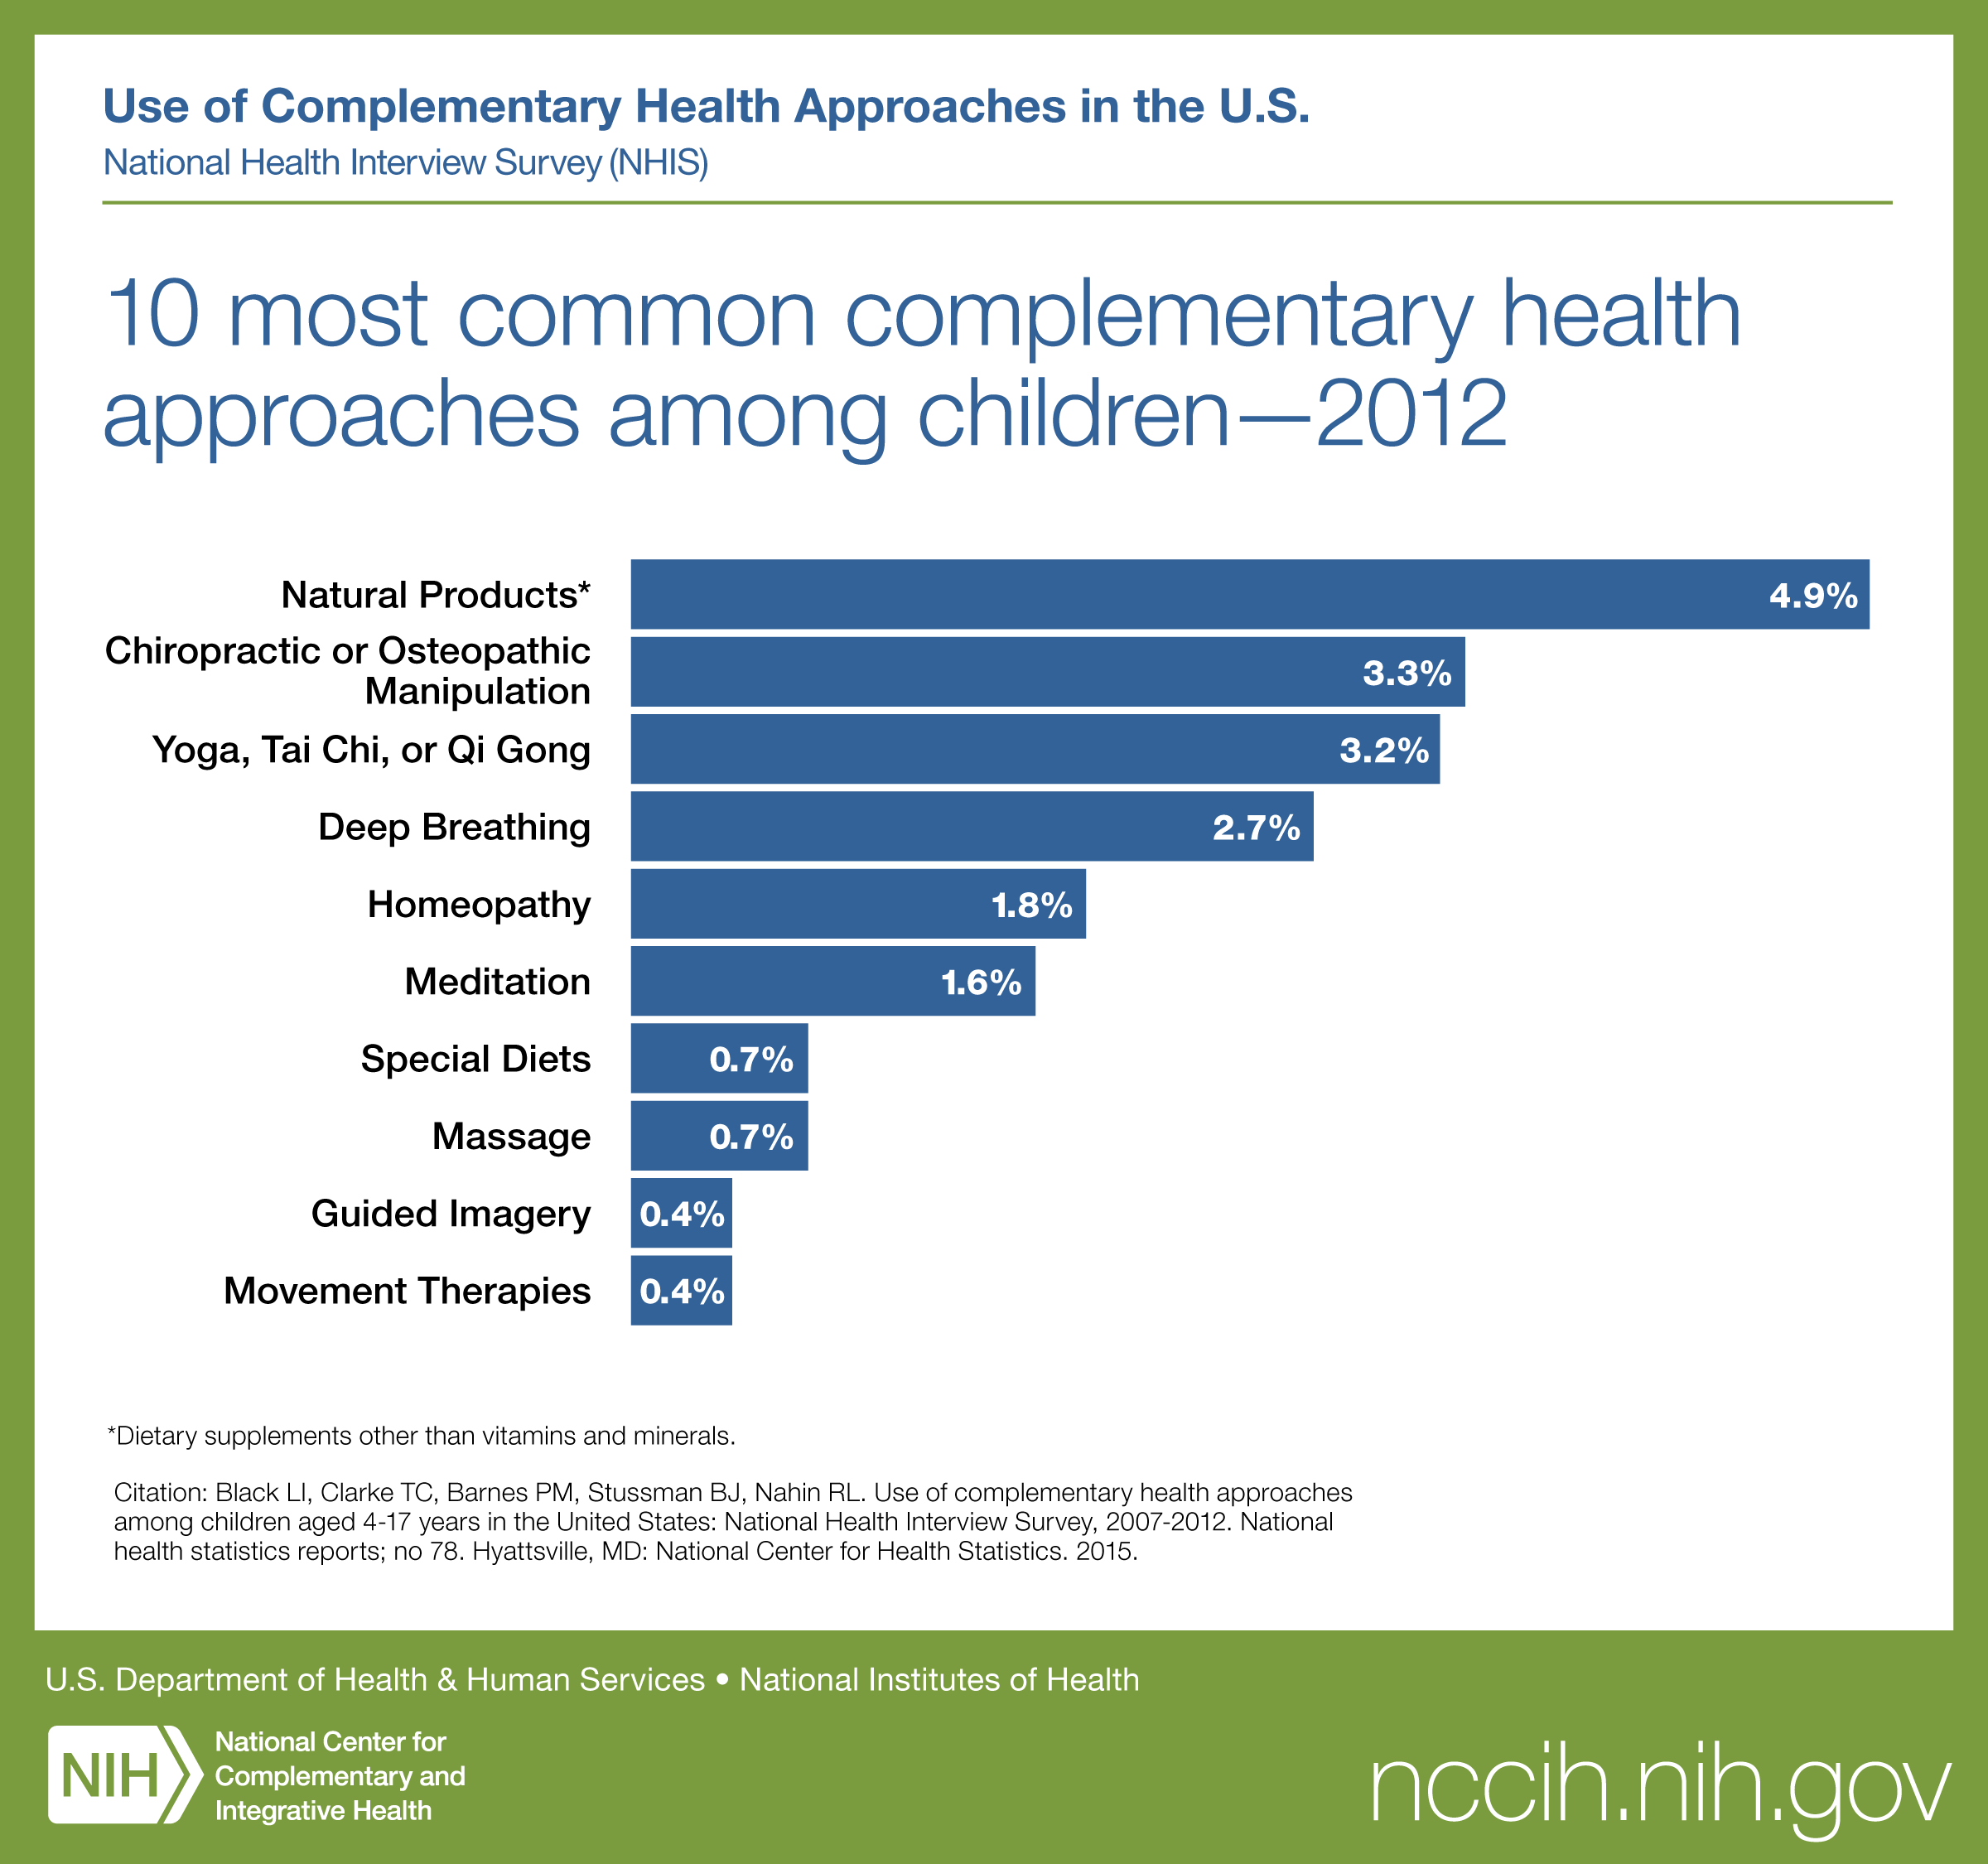 10 most common complementary health approaches among children -- 2012